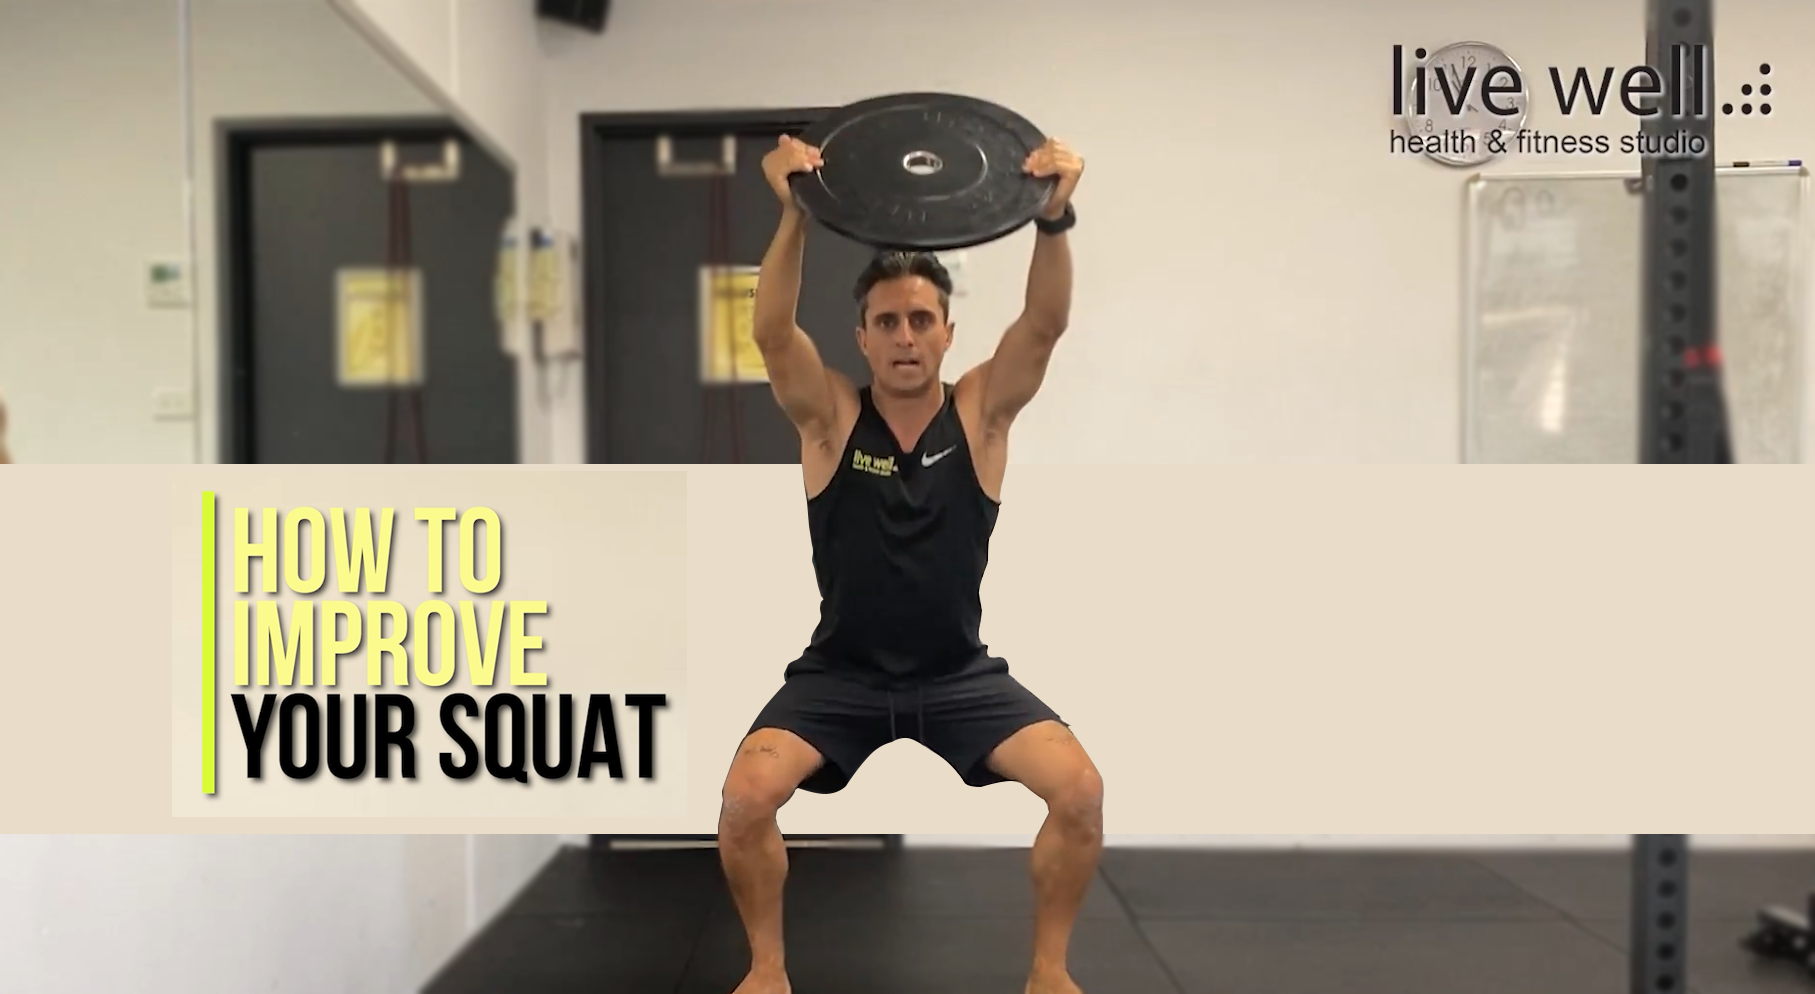 How to Improve Your Squat